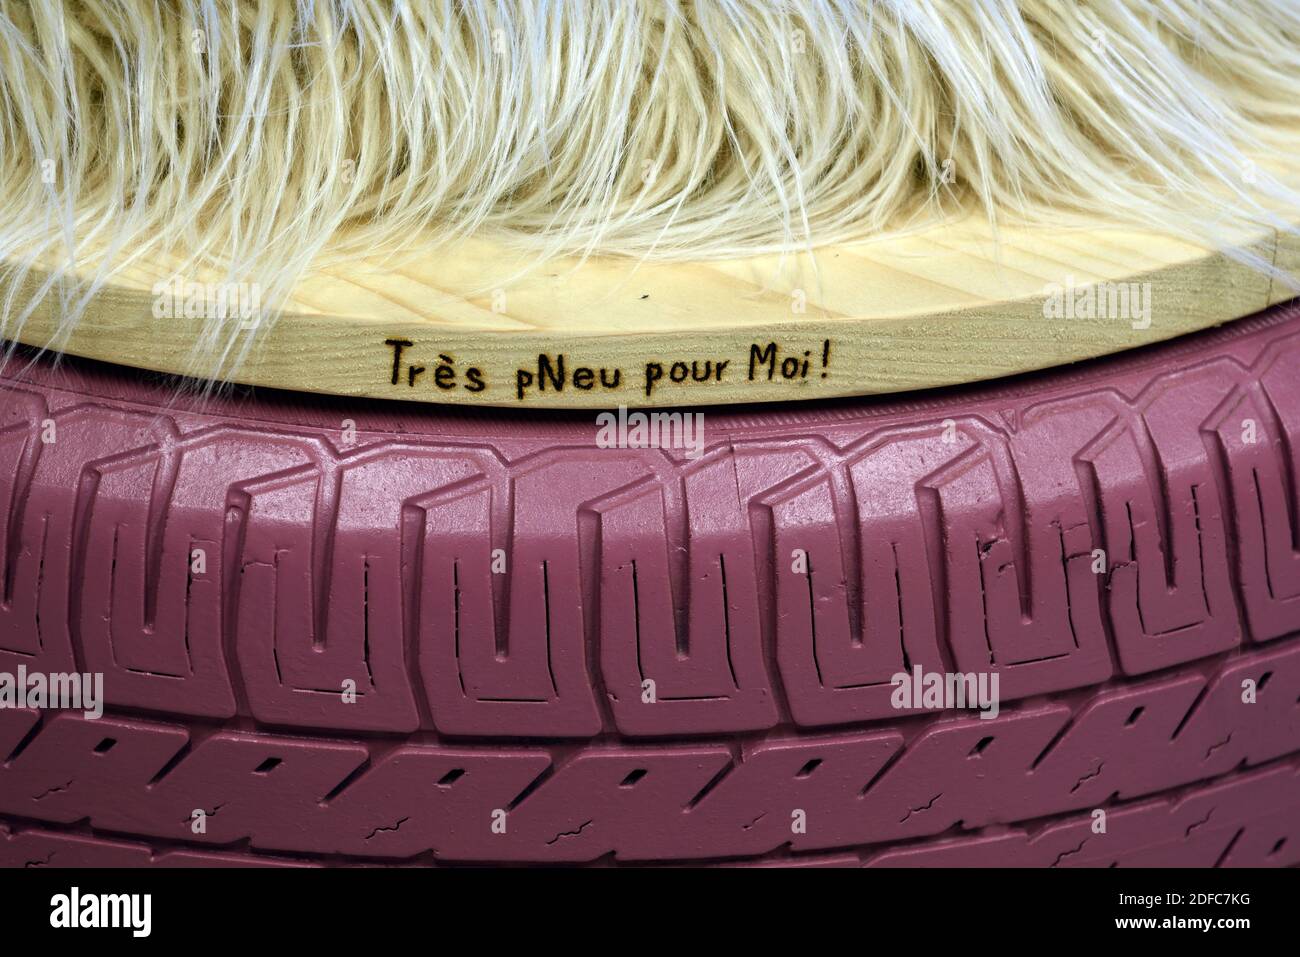 France, Jura, Poligny, Tres Pneu pour Moi, manufacture of small furniture in recycled tires, poufs, tables Stock Photo